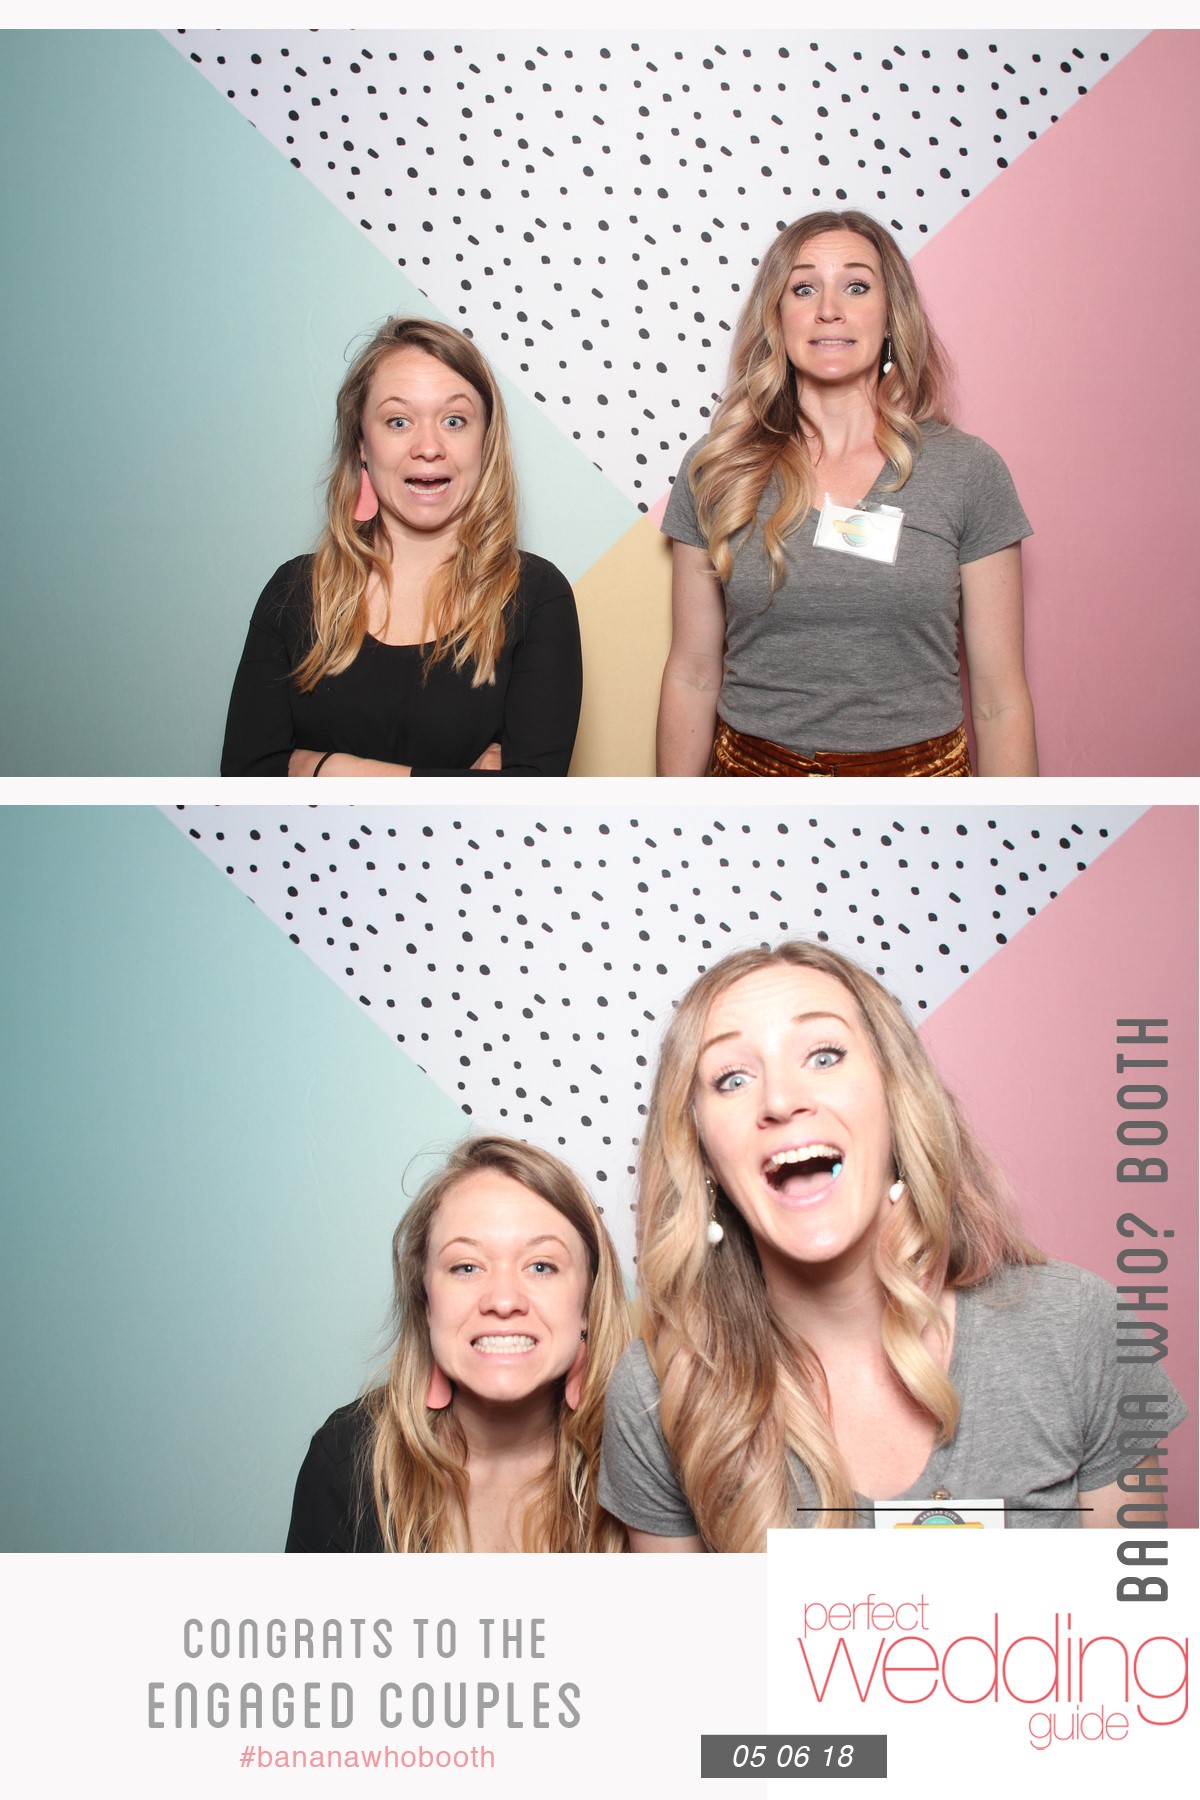 PWG Bridal Show, Overland Park Convention Center, KC Photo booth, Kansas City photo booth, Photo booth, Jana Marler, Custom backdrop, 4x6 print out